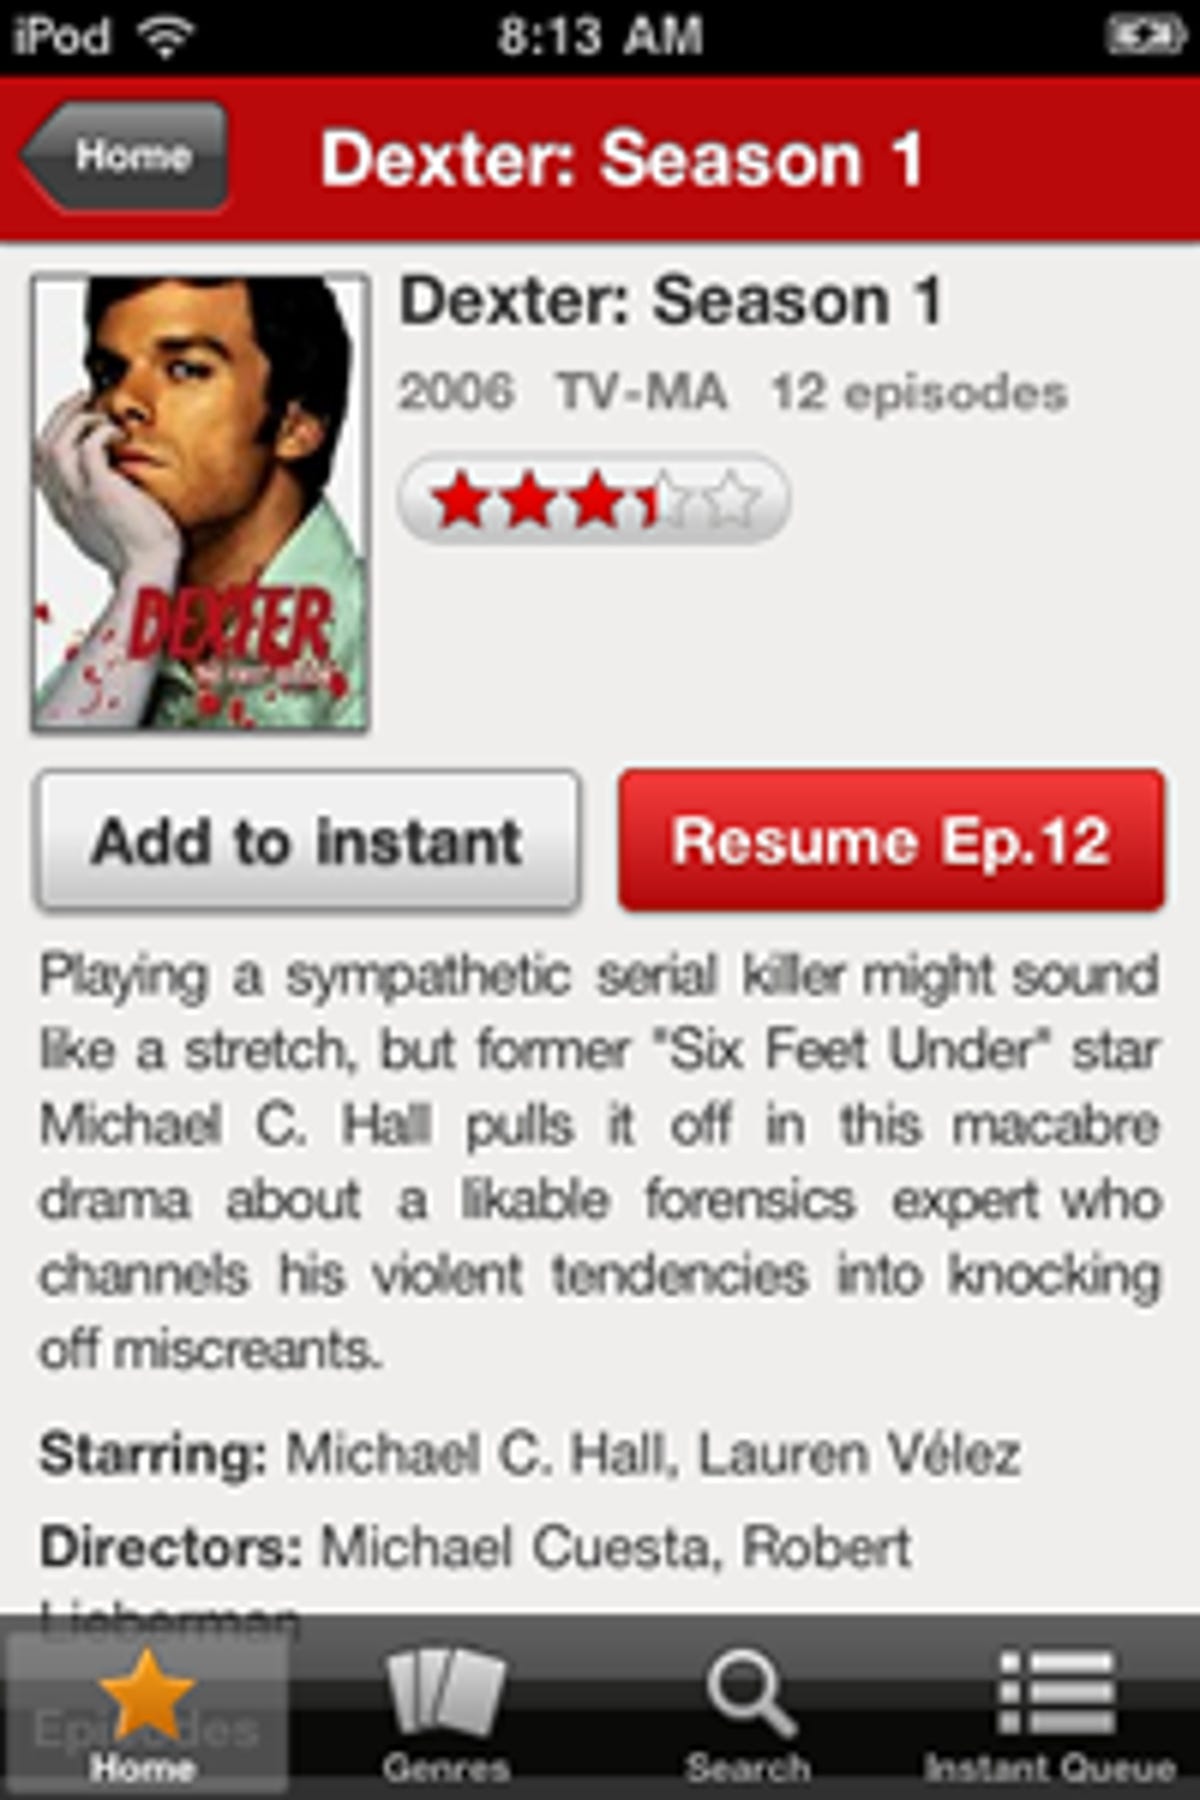 iPhone and iPod Touch users can now stream their favorite Netflix videos.